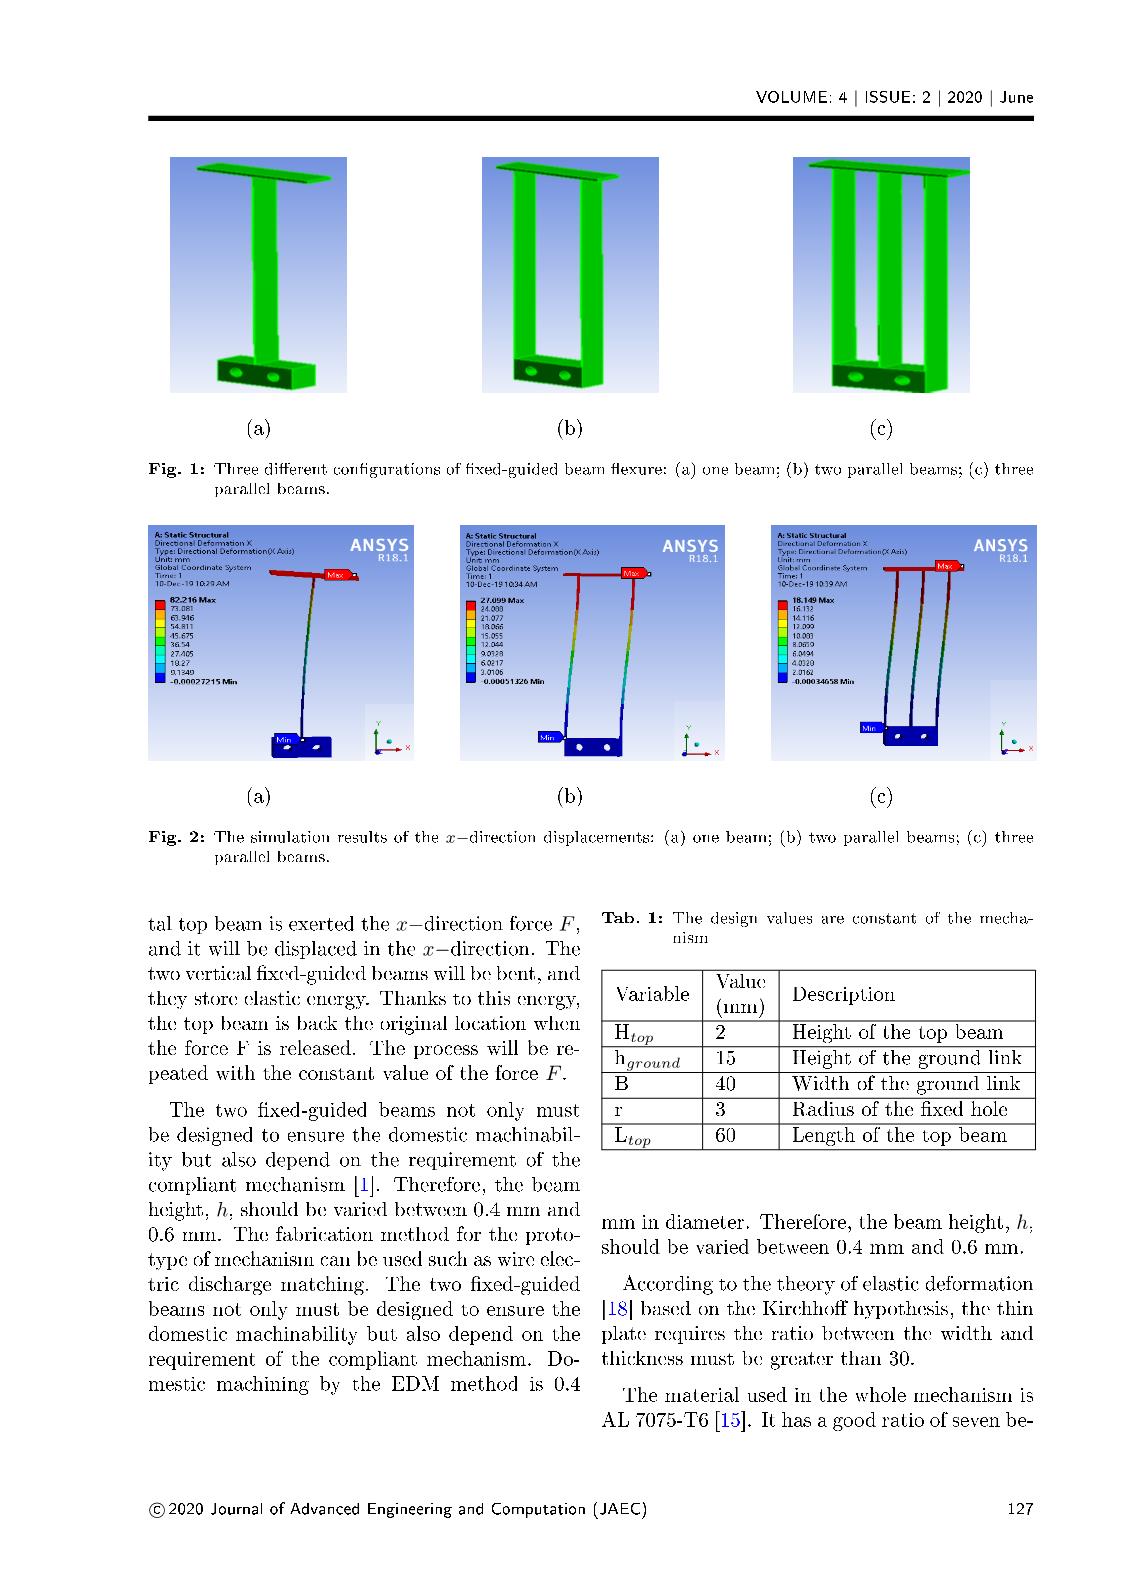 Statics analysis and optimization design for a fixed - guided beam flexure trang 3